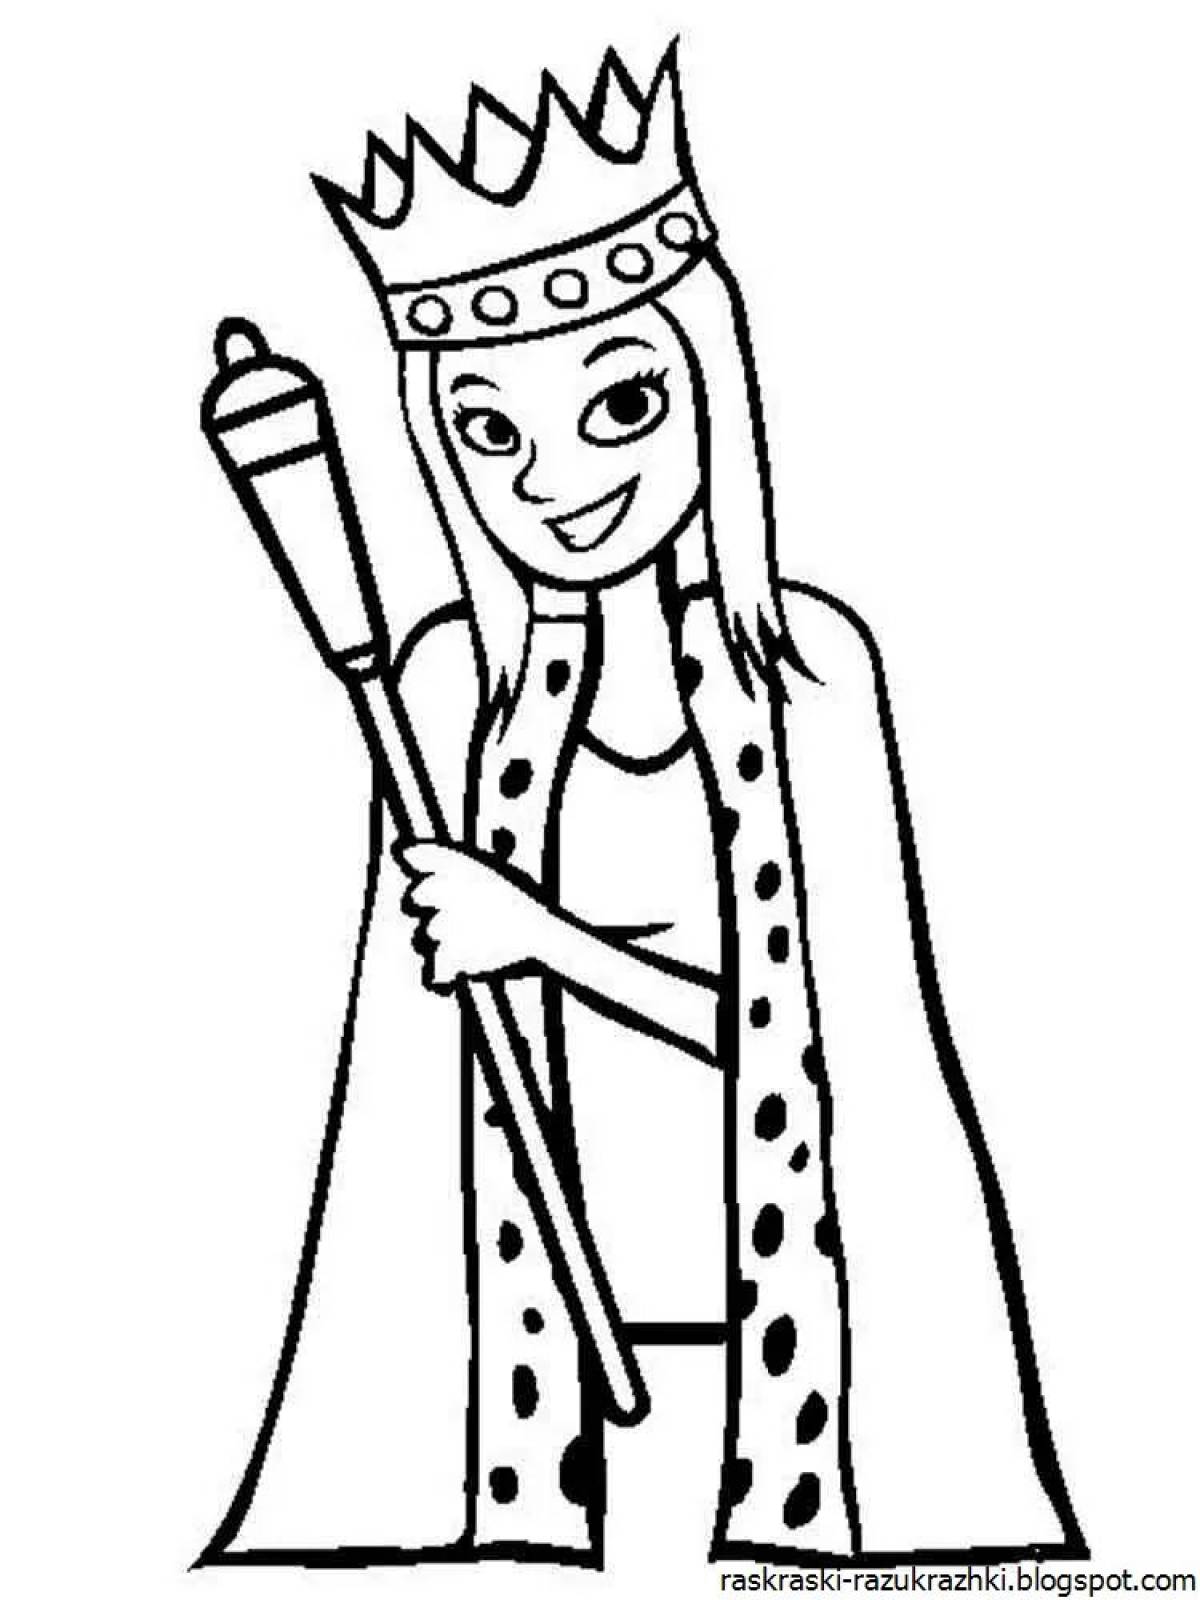 Creative queen coloring pages for kids